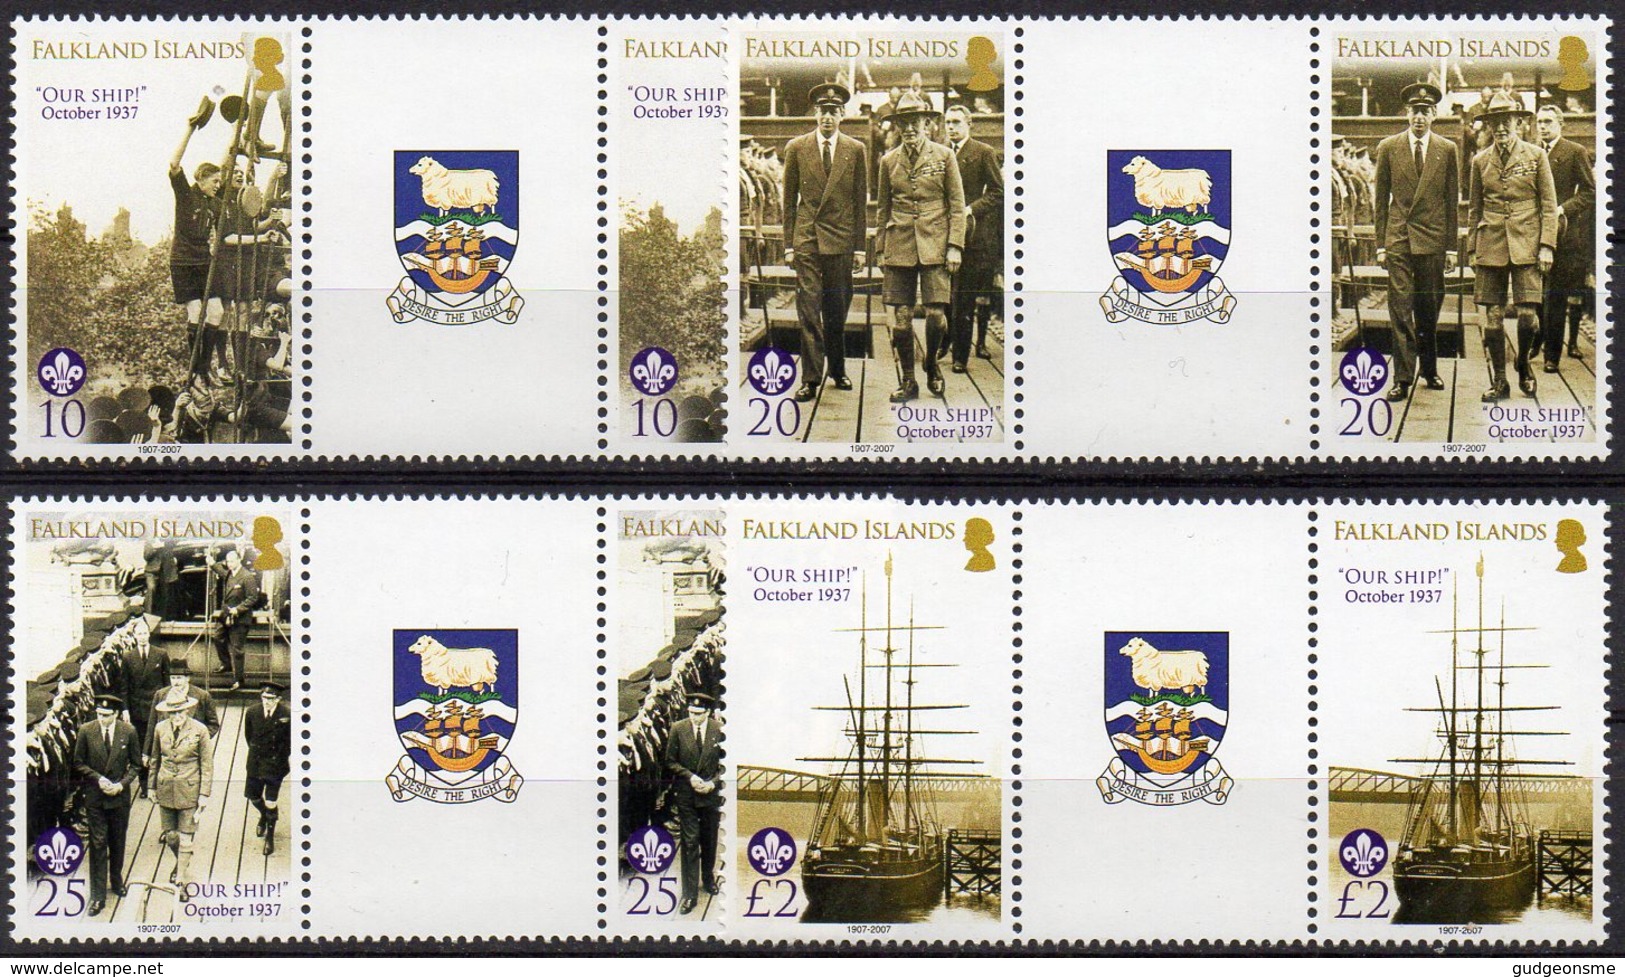 2007 Discovery Ship & Boy Scouts Set 4 Values MNH Gutter Pairs - Falkland Islands